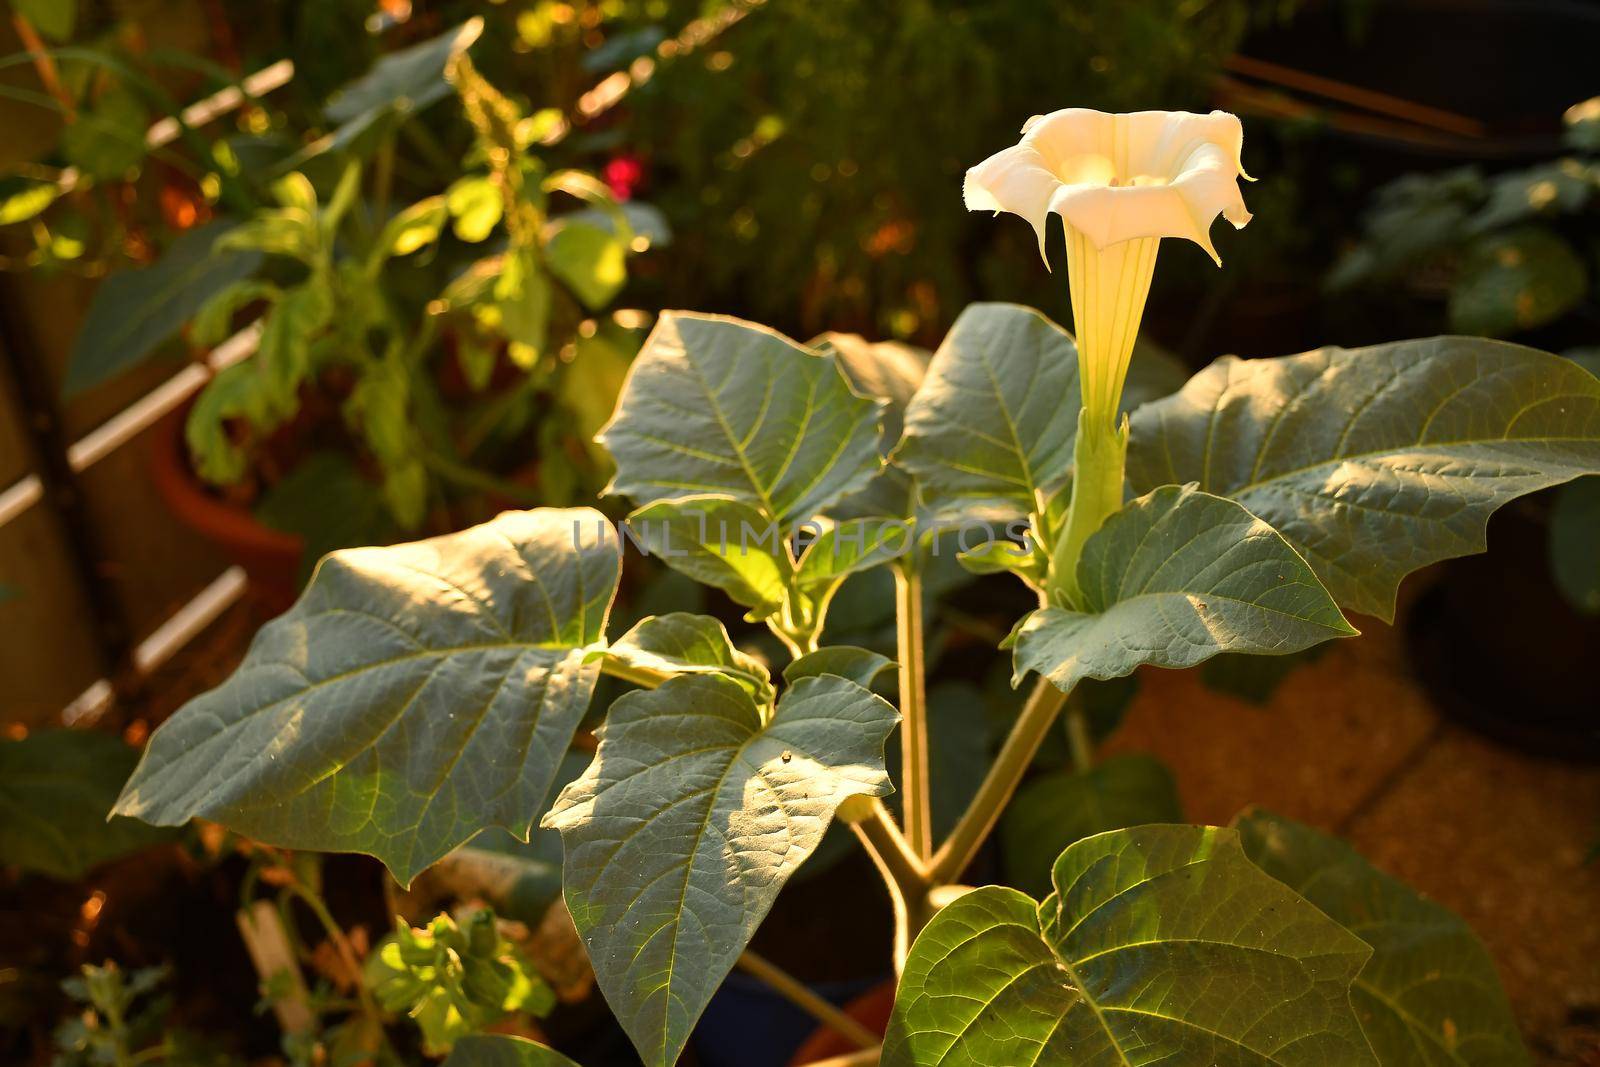 thorn apple with white flower in morning sun by Jochen